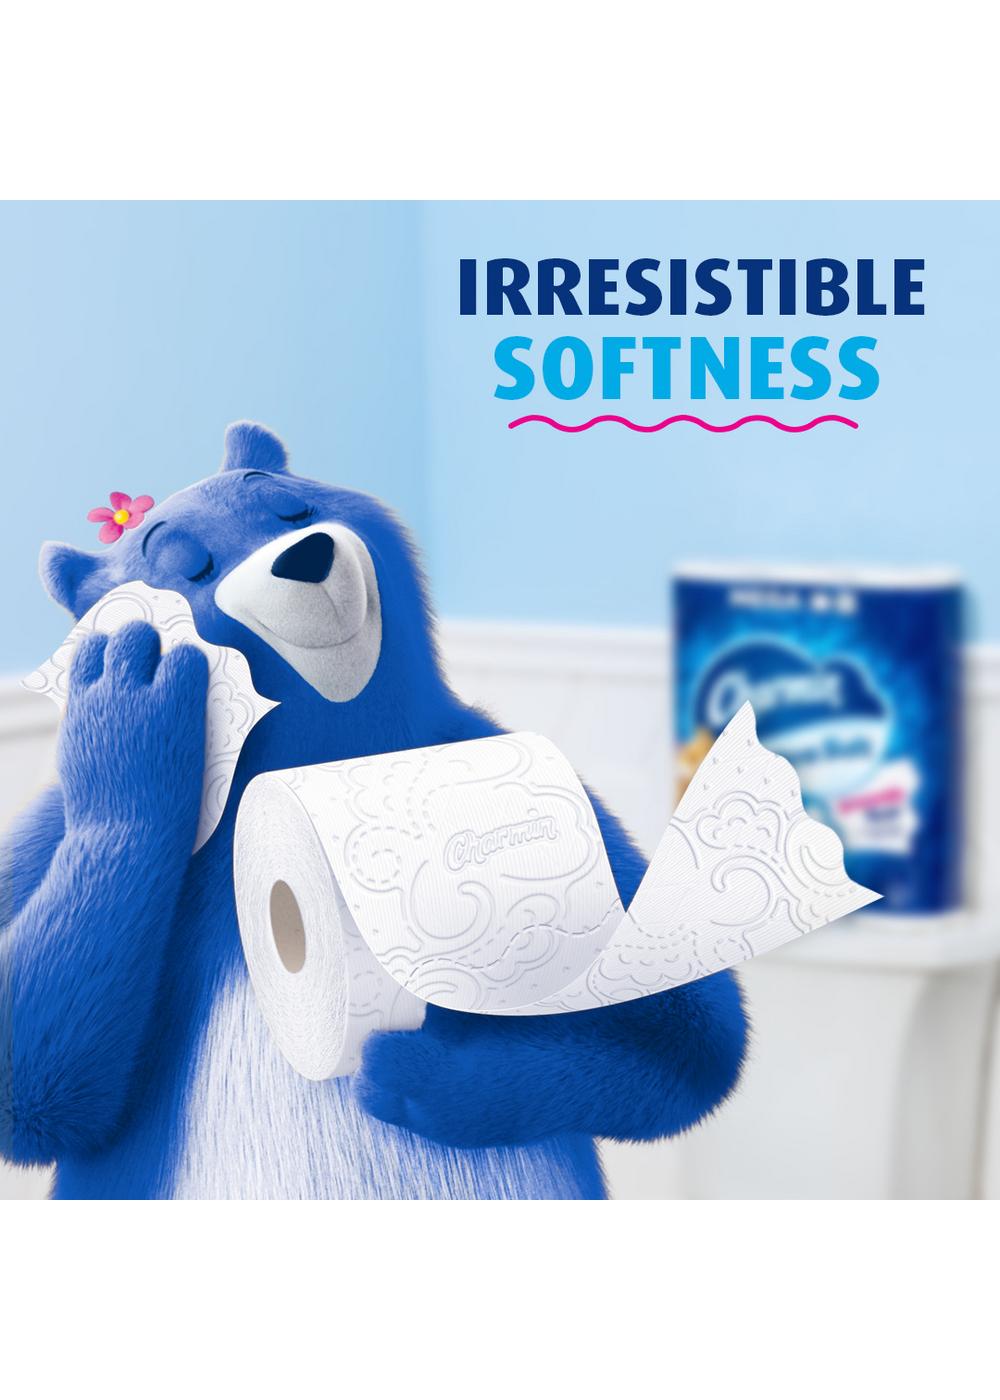 Charmin Ultra Soft Toilet Paper; image 17 of 20